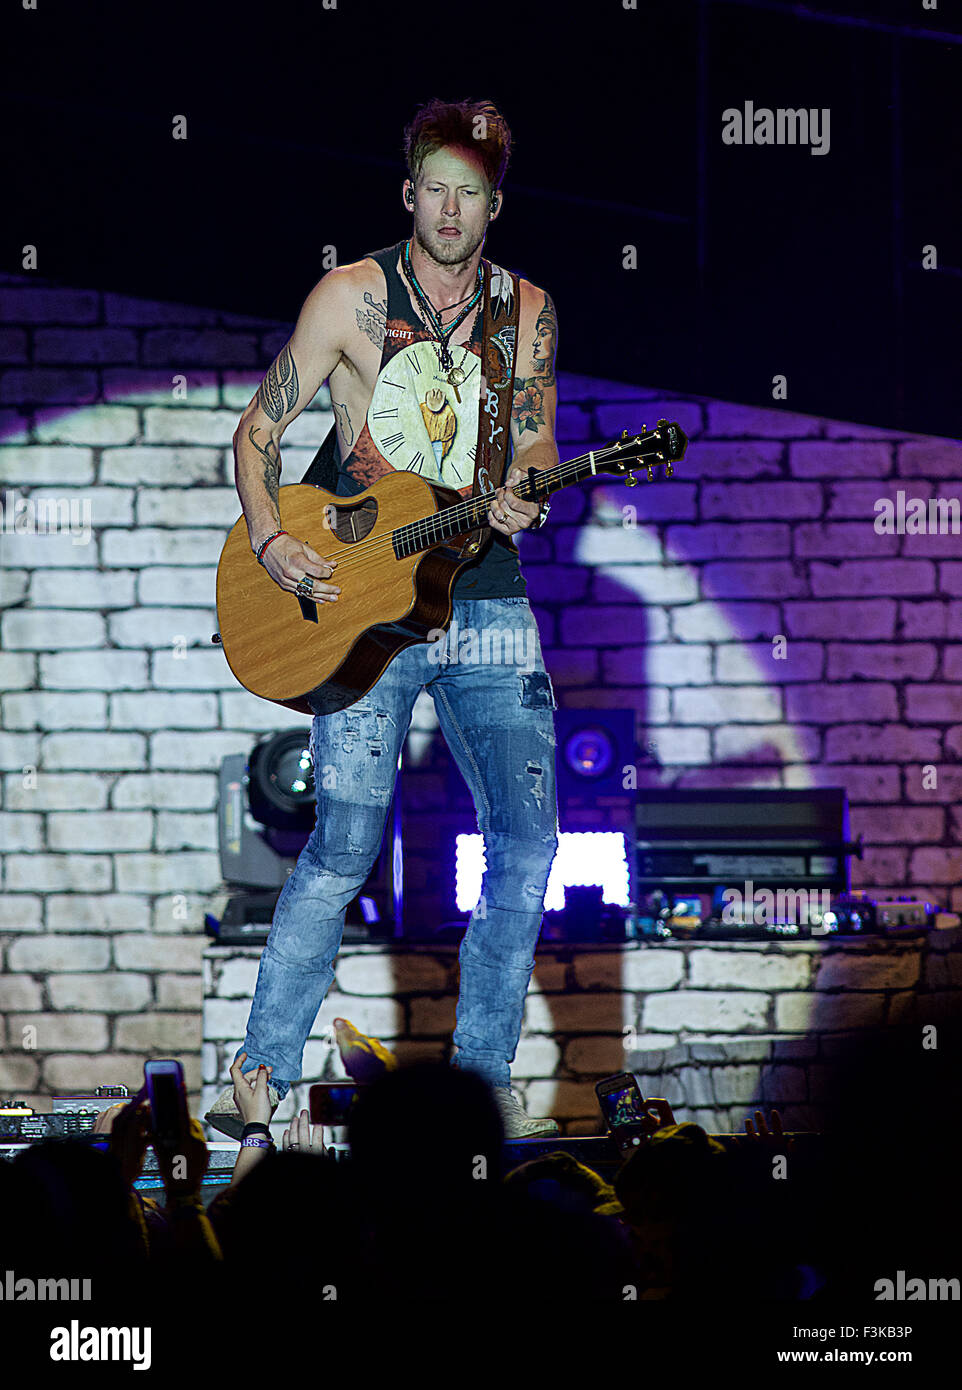 Manhattan, Kansas  6-26-2015 Brian Kelley  of Florida Georgia Line at the Kicker Country concert in Manhattan, Kansas. Florida Georgia Line is an American bro-country duo comprising Brian Kelley (from Ormond Beach, Florida) and Tyler Hubbard (from Monroe, Georgia). Florida Georgia Line was formed in 2010 in Nashville, Tennessee. In December 2011, they signed a publishing/production/management deal with Craig Wiseman (Big Loud Shirt Publishing), Kevin 'Chief' Zaruk (Chief Music Management), and Joey Moi's (Mountain View Records) partnership, Big Loud Mountain.[2] Their second EP, It'z Just What Stock Photo